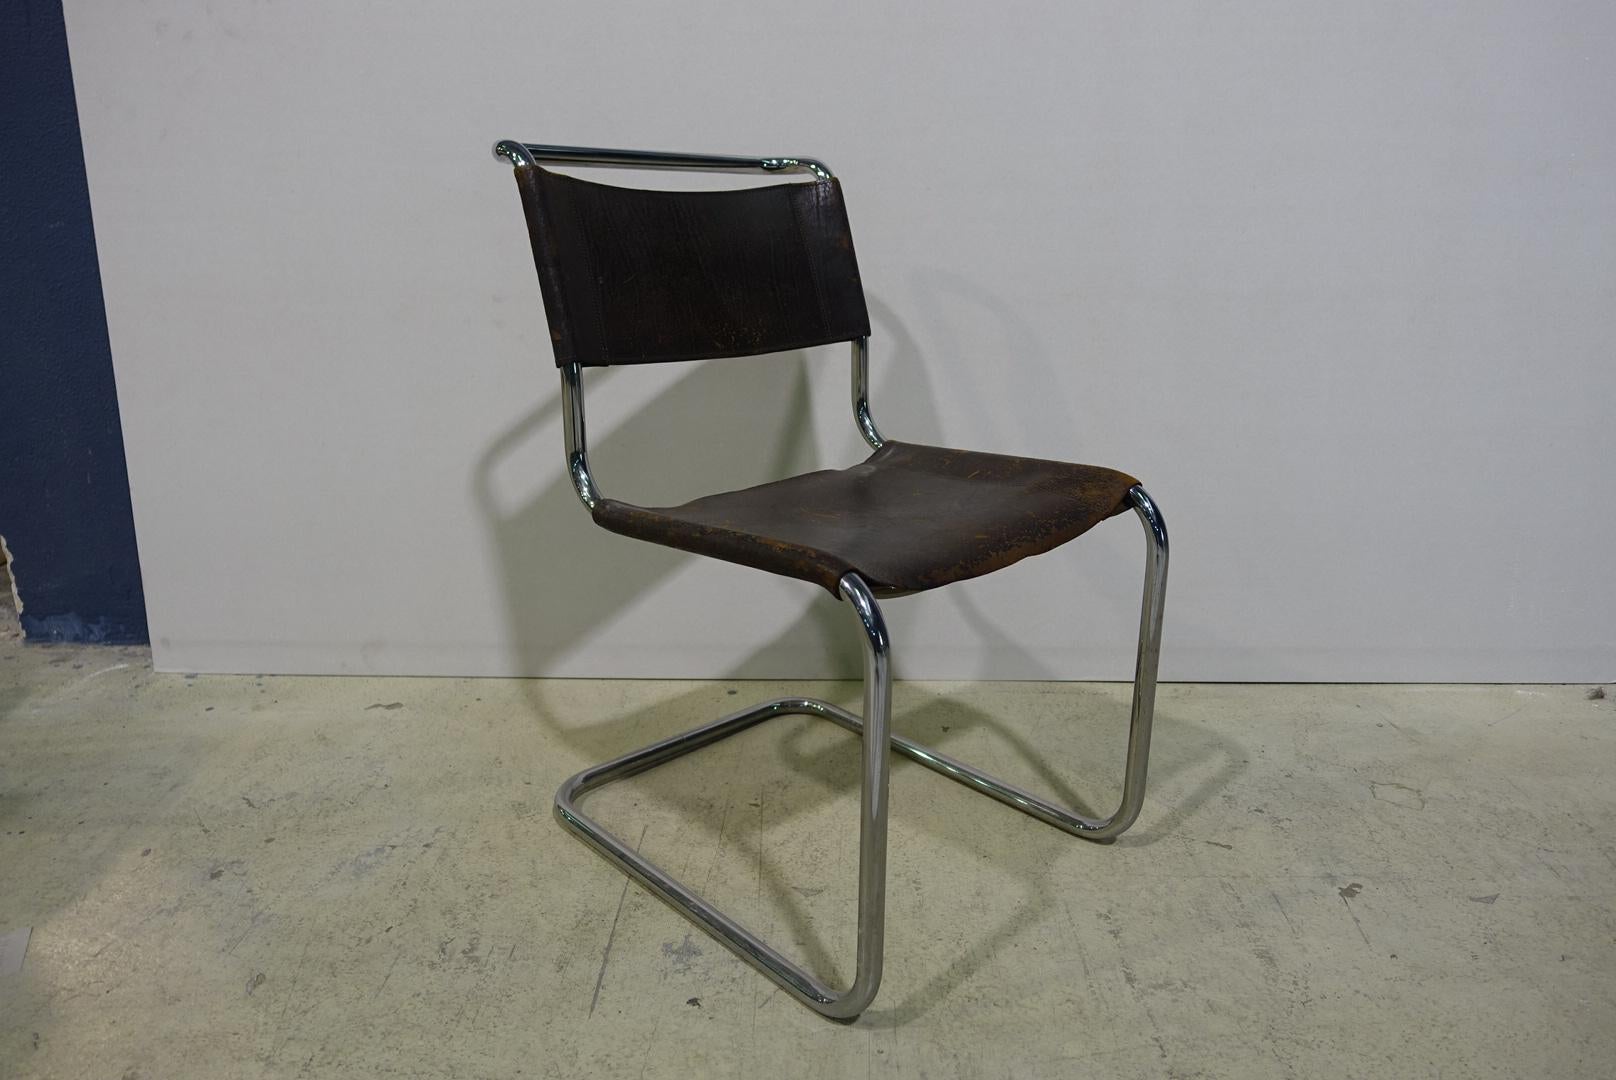 German Set of 4 Thonet S33 Buffalo Leather Chromed Dining Chairs by Mart Stam, 1926